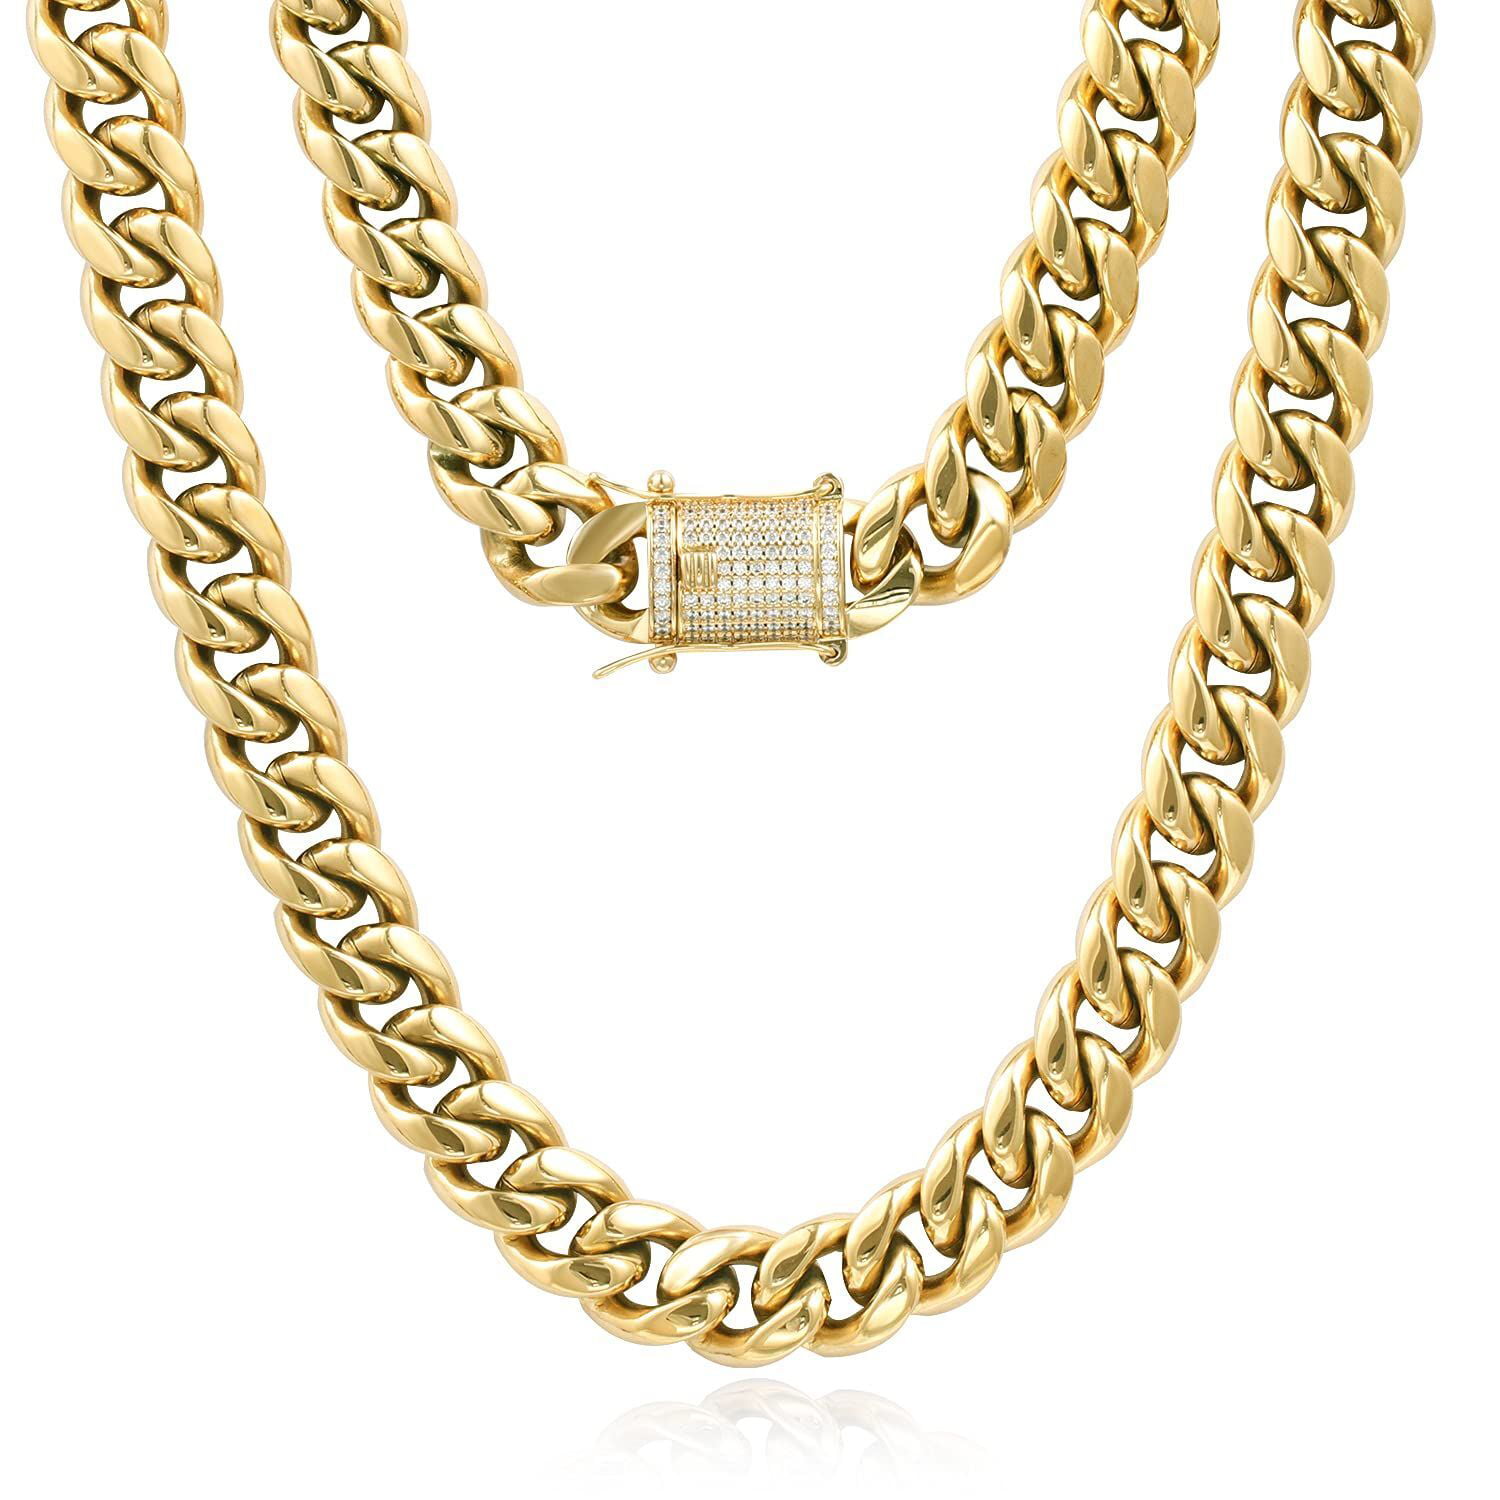 GOLD IDEA JEWELRY 14k Gold Plated Stainless Steel Thick Miami Cuban Link Chain with Lab Diamond Clasp Men's Hip Hop Necklace/Bracelet for Men Women 